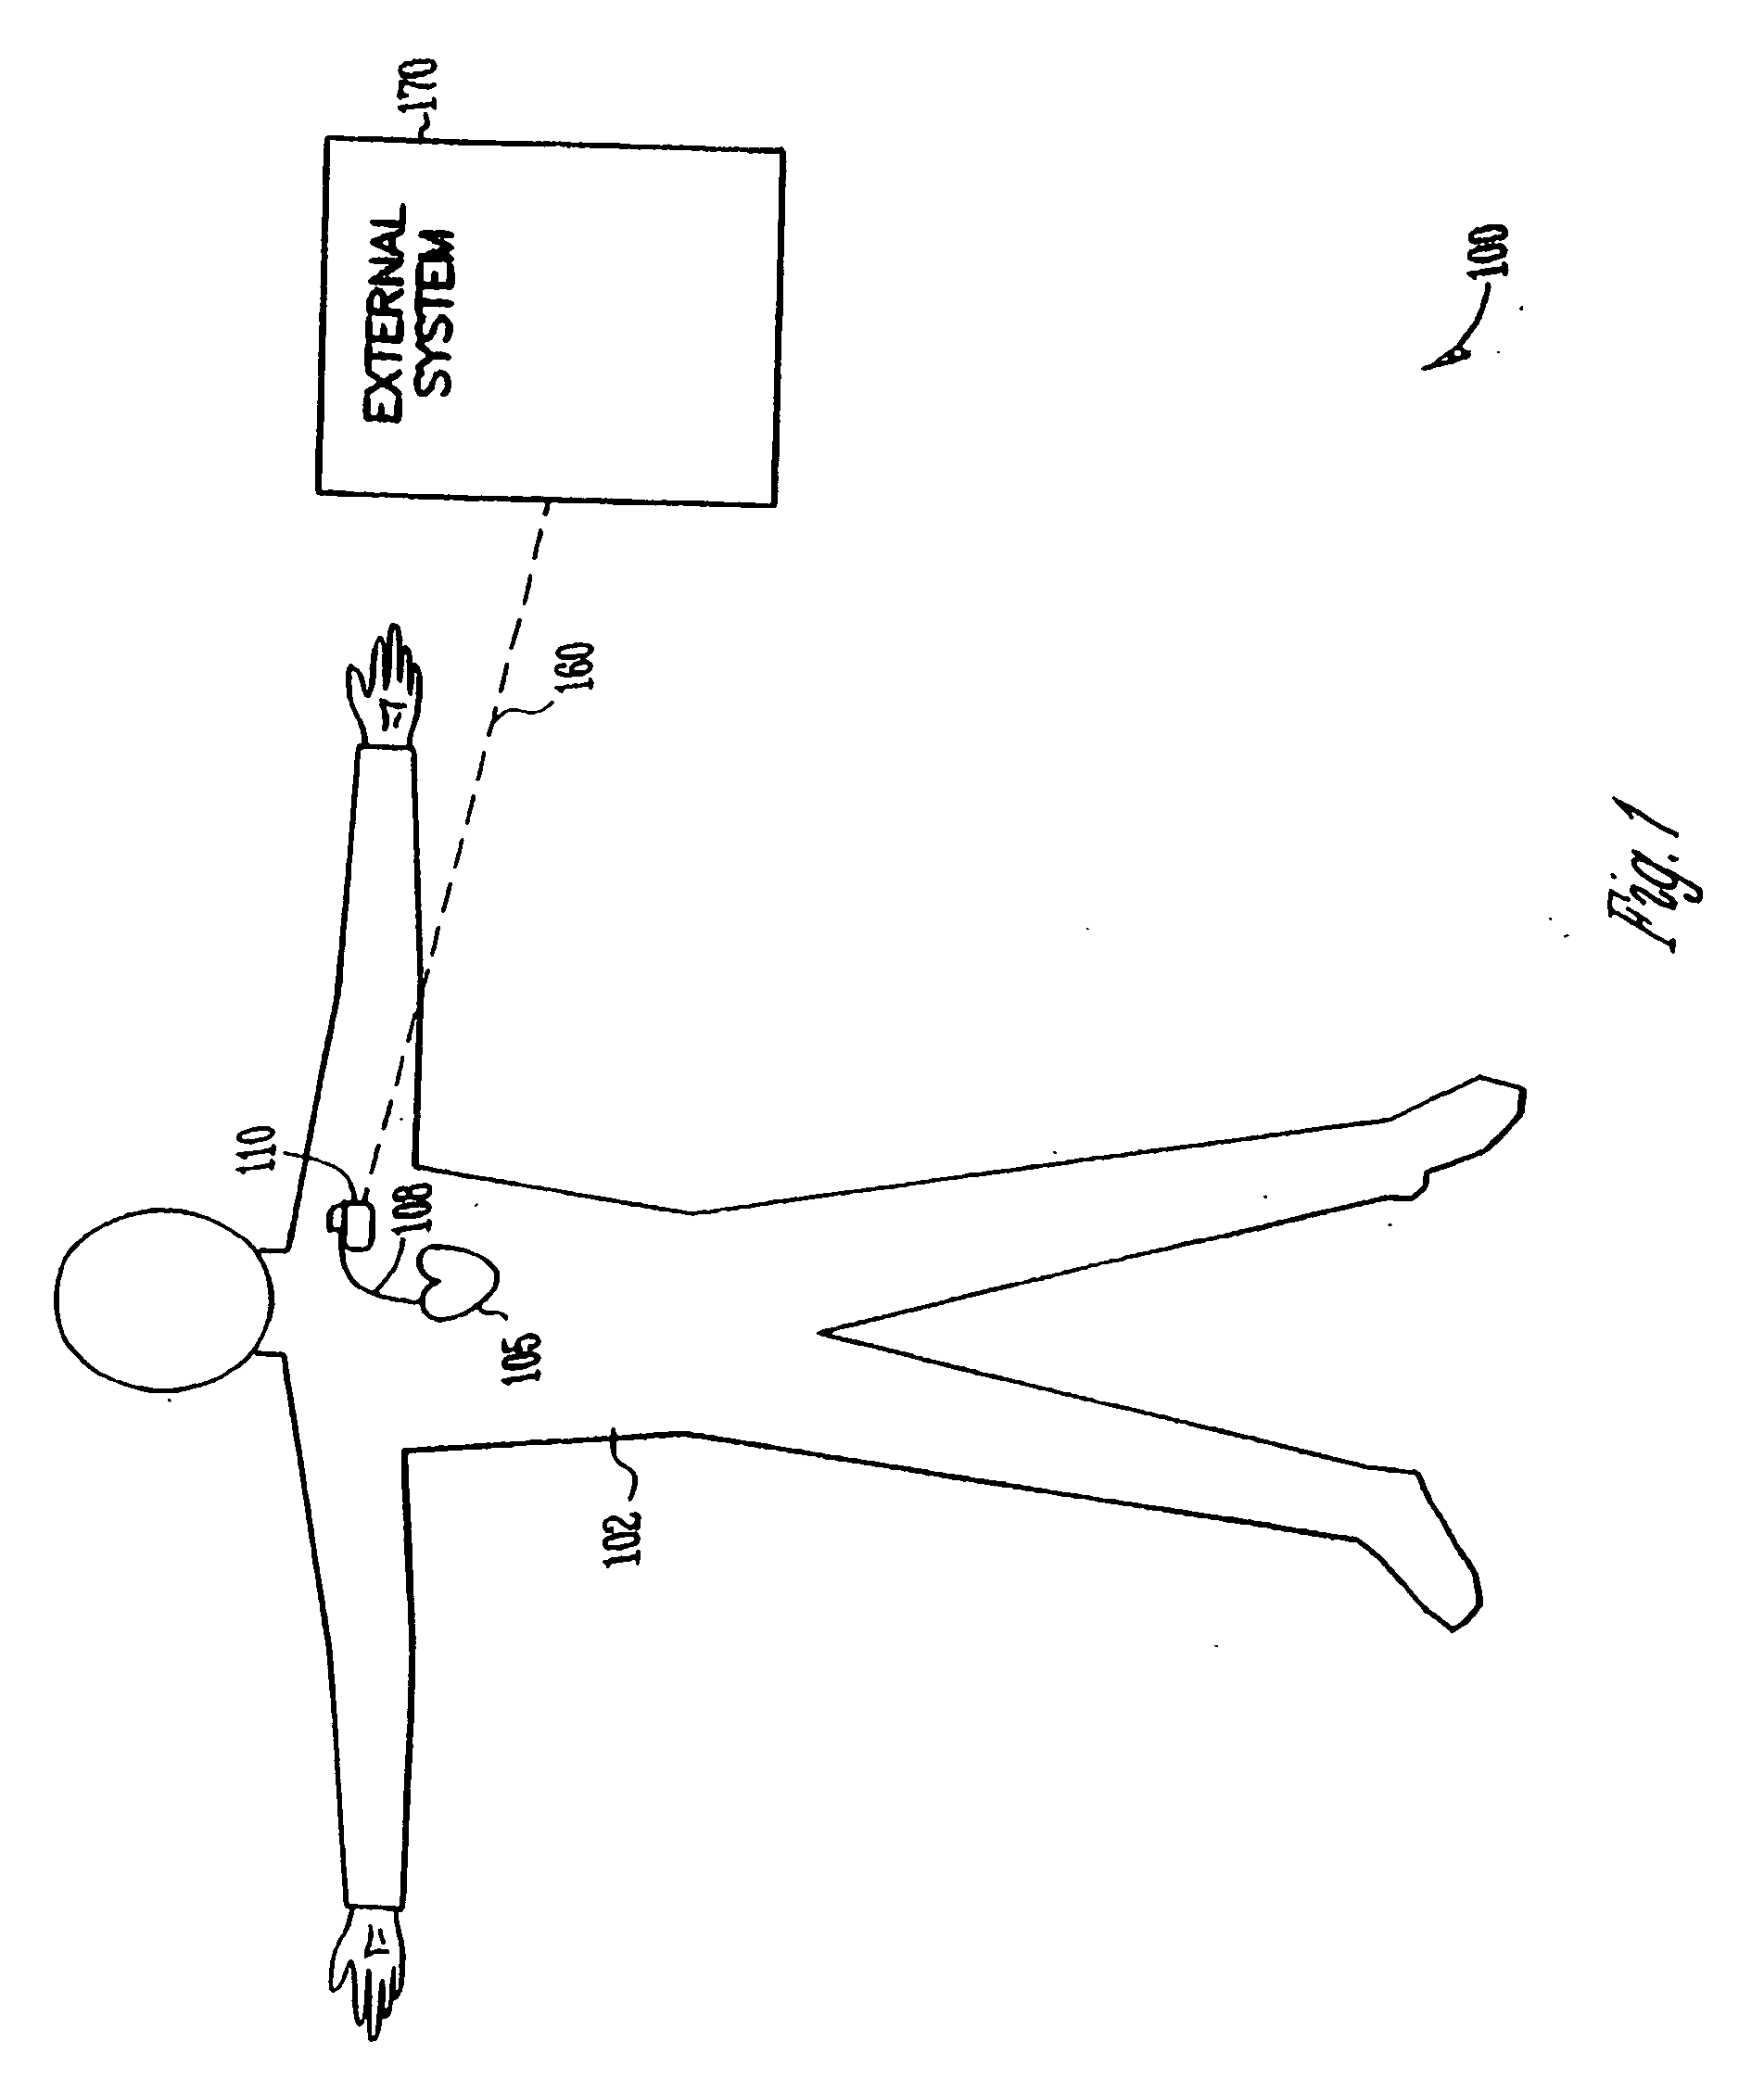 Systems and methods for multi-axis cardiac vibration measurements